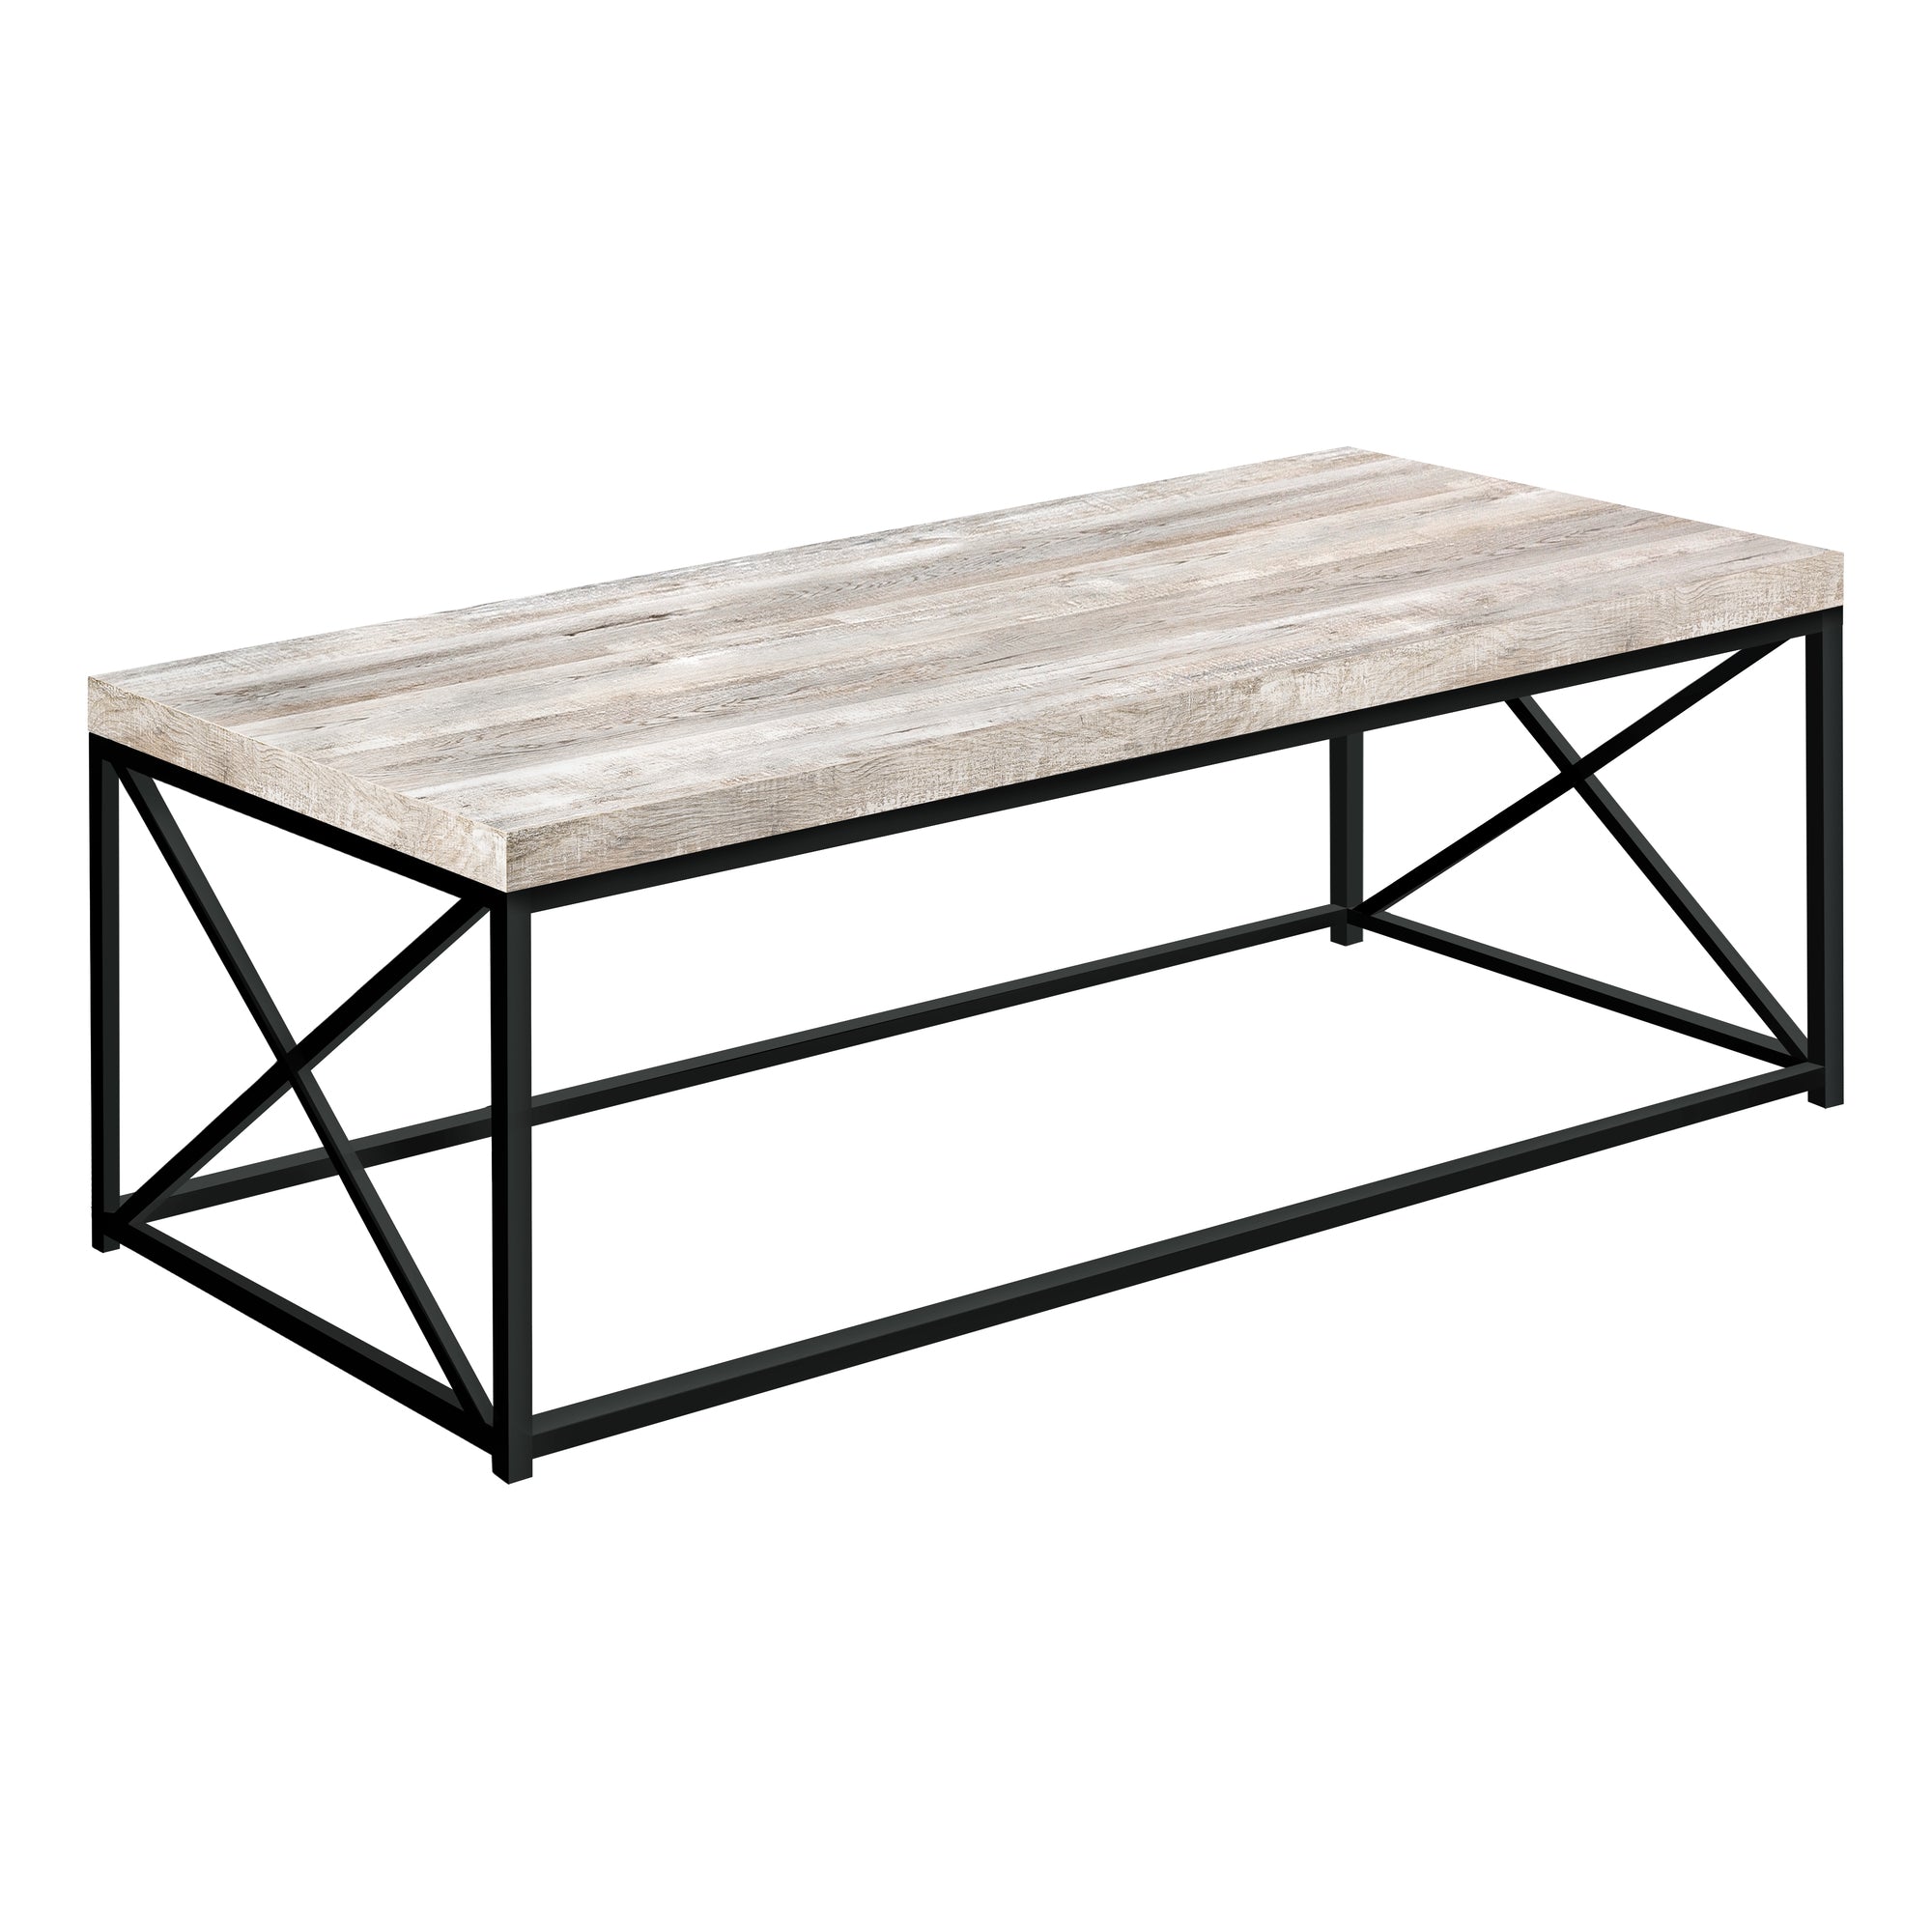 MN-573418    Coffee Table, Accent, Cocktail, Rectangular, Living Room, Metal Frame, Laminate, Taupe Reclaimed Wood Look, Black, Contemporary, Modern